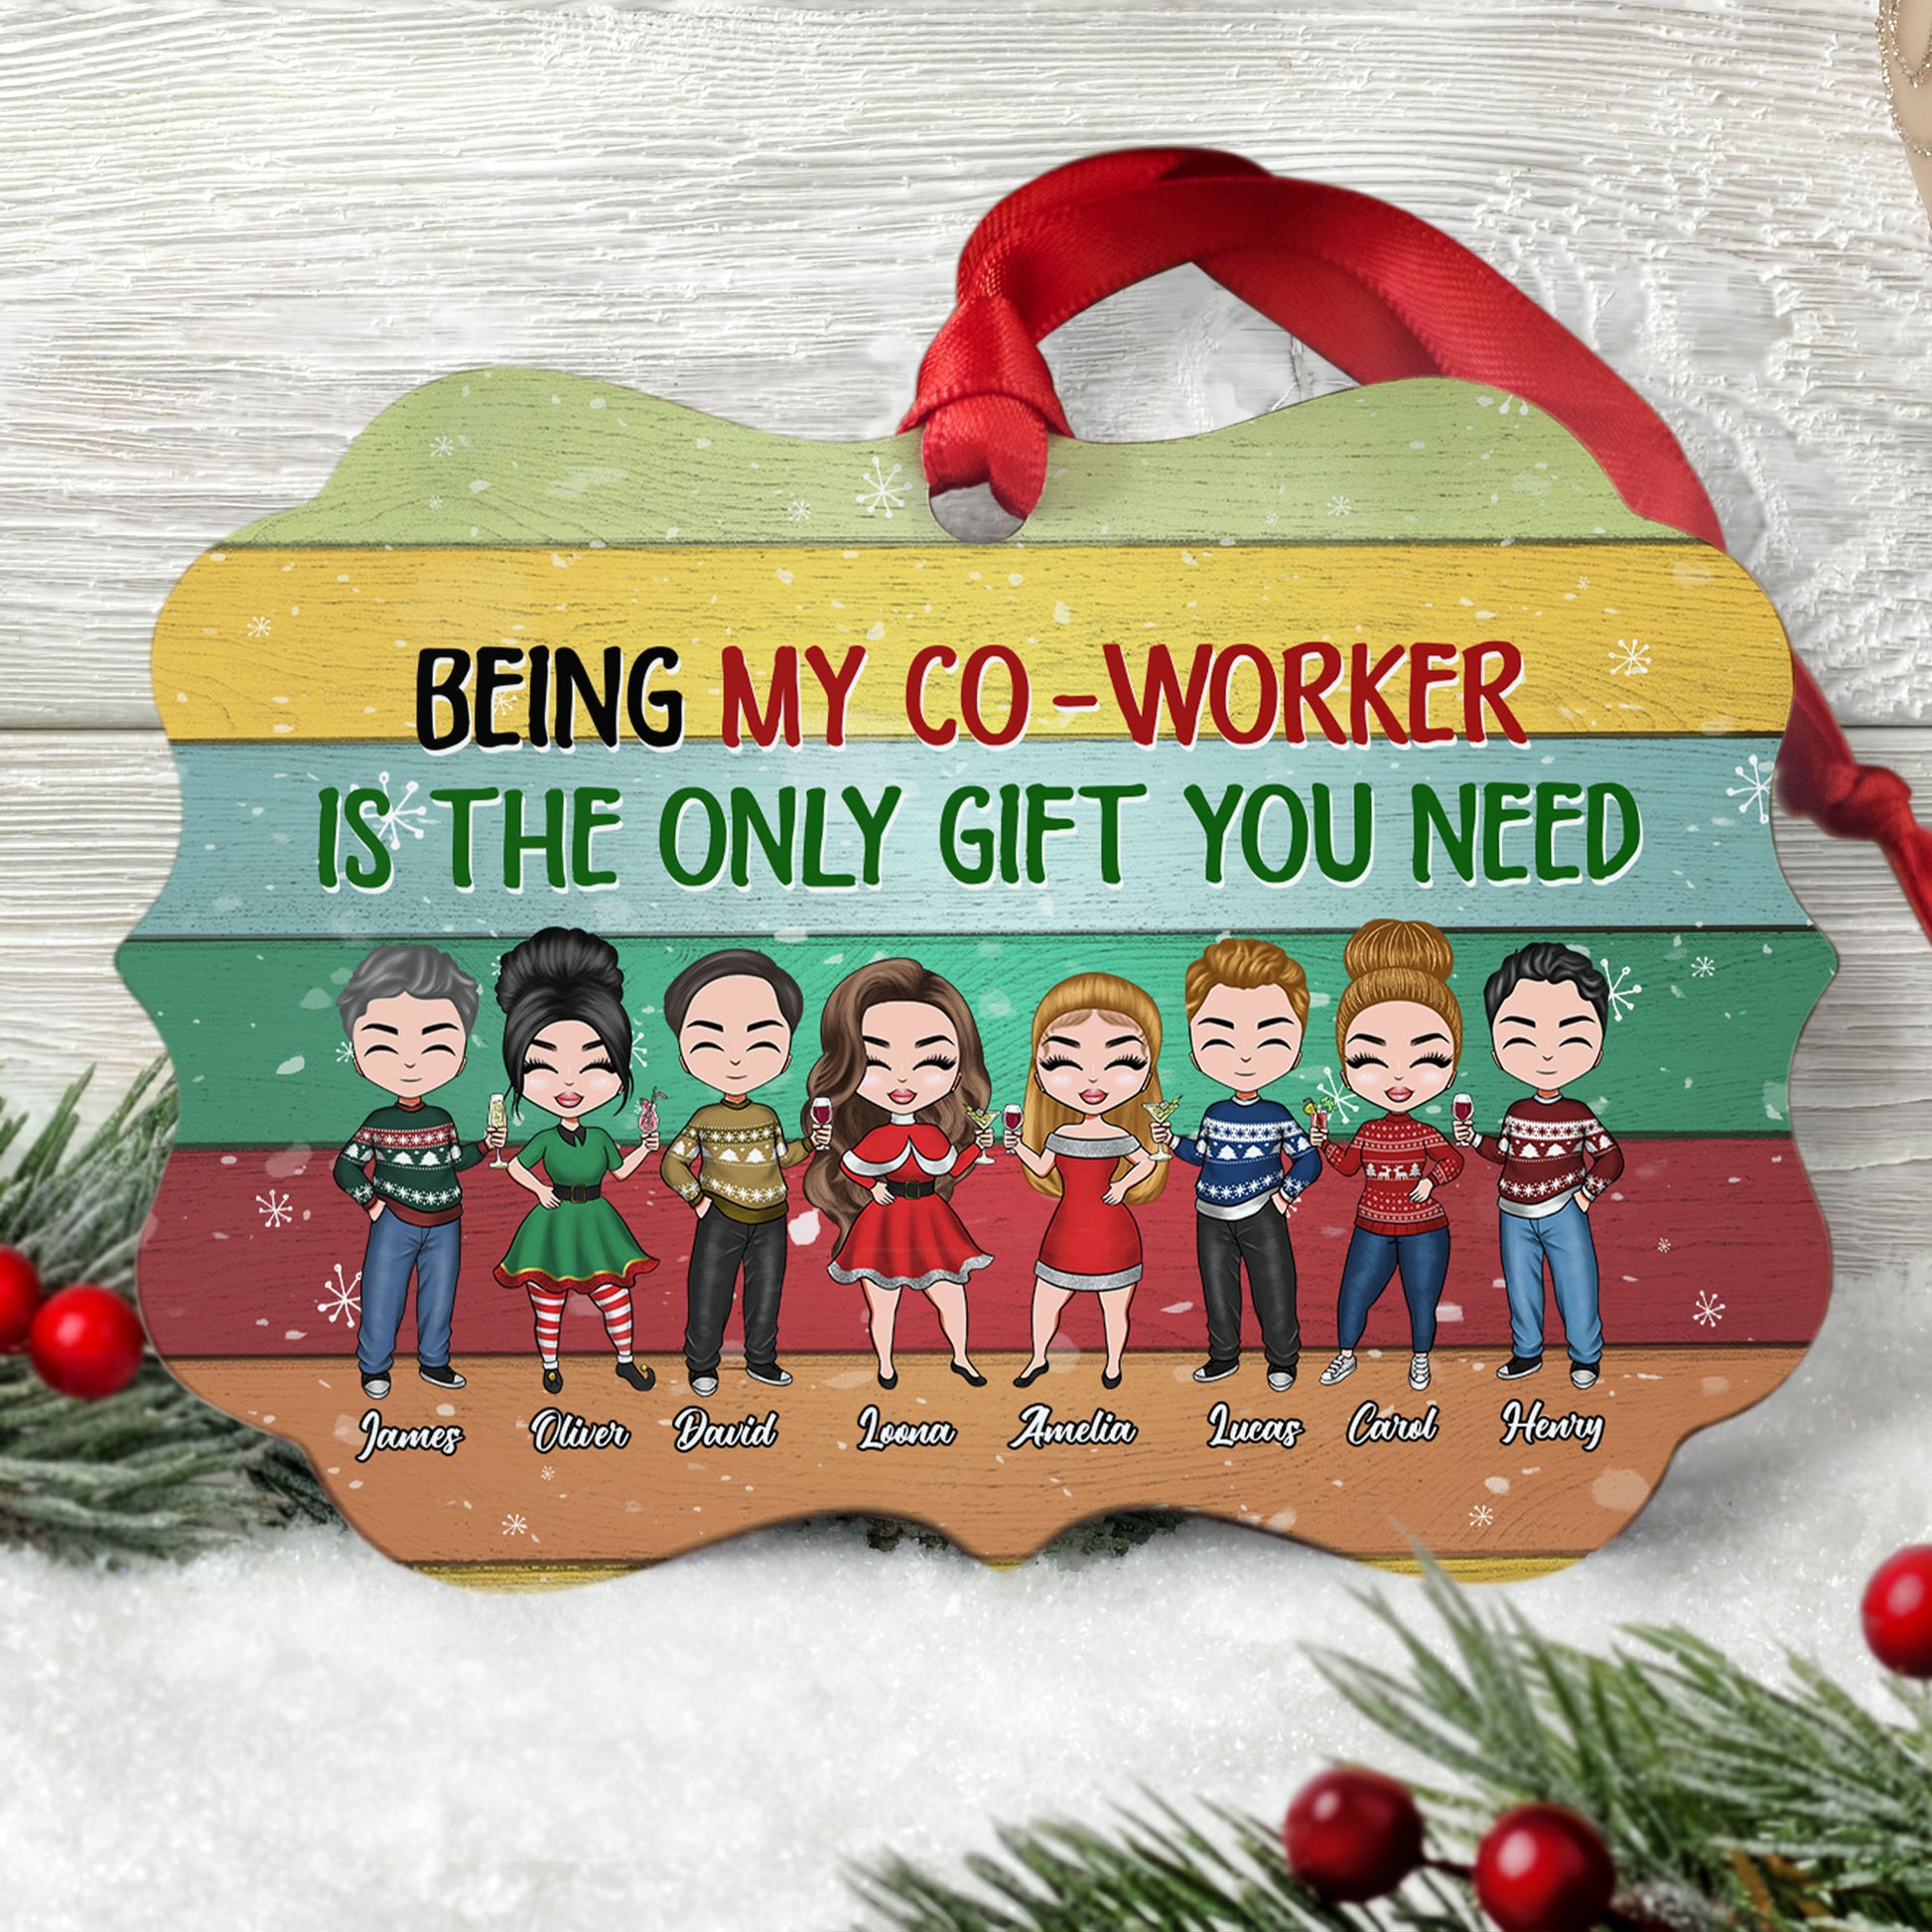 Being My Co-Worker Is The Only Gift You Need - Personalized Aluminum Ornament - Christmas Gift Co-worker Ornament For Work Besties - Xmas Chibi